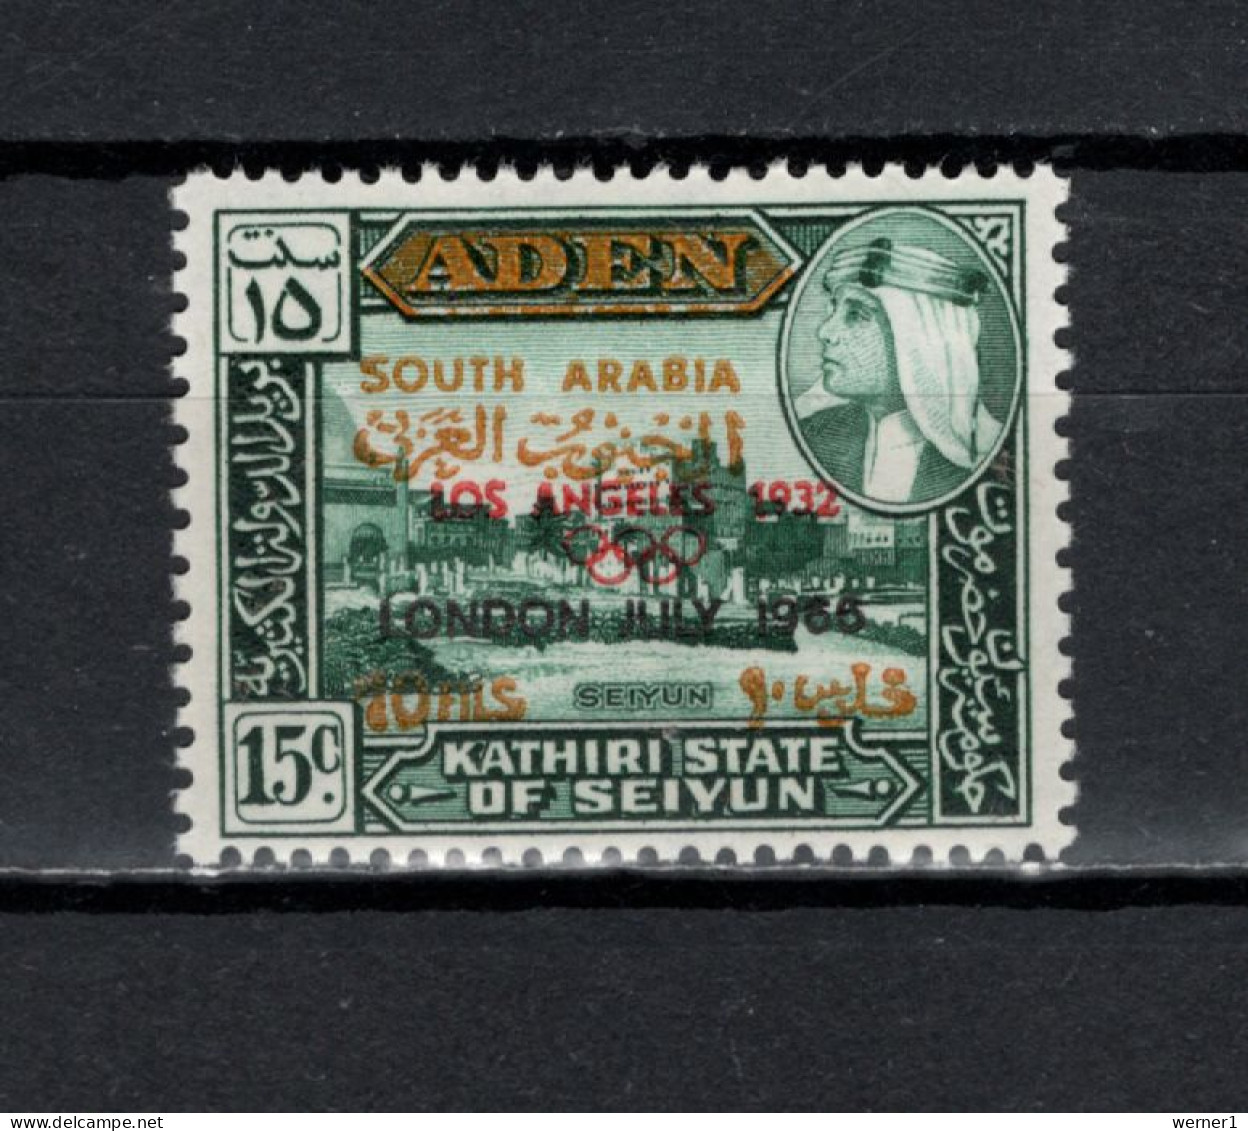 Aden - Kathiri State Of Seiyun 1966 Football Soccer World Cup Stamp With Black O/p "LONDON JULY 1966" MNH -scarce- - 1966 – Angleterre